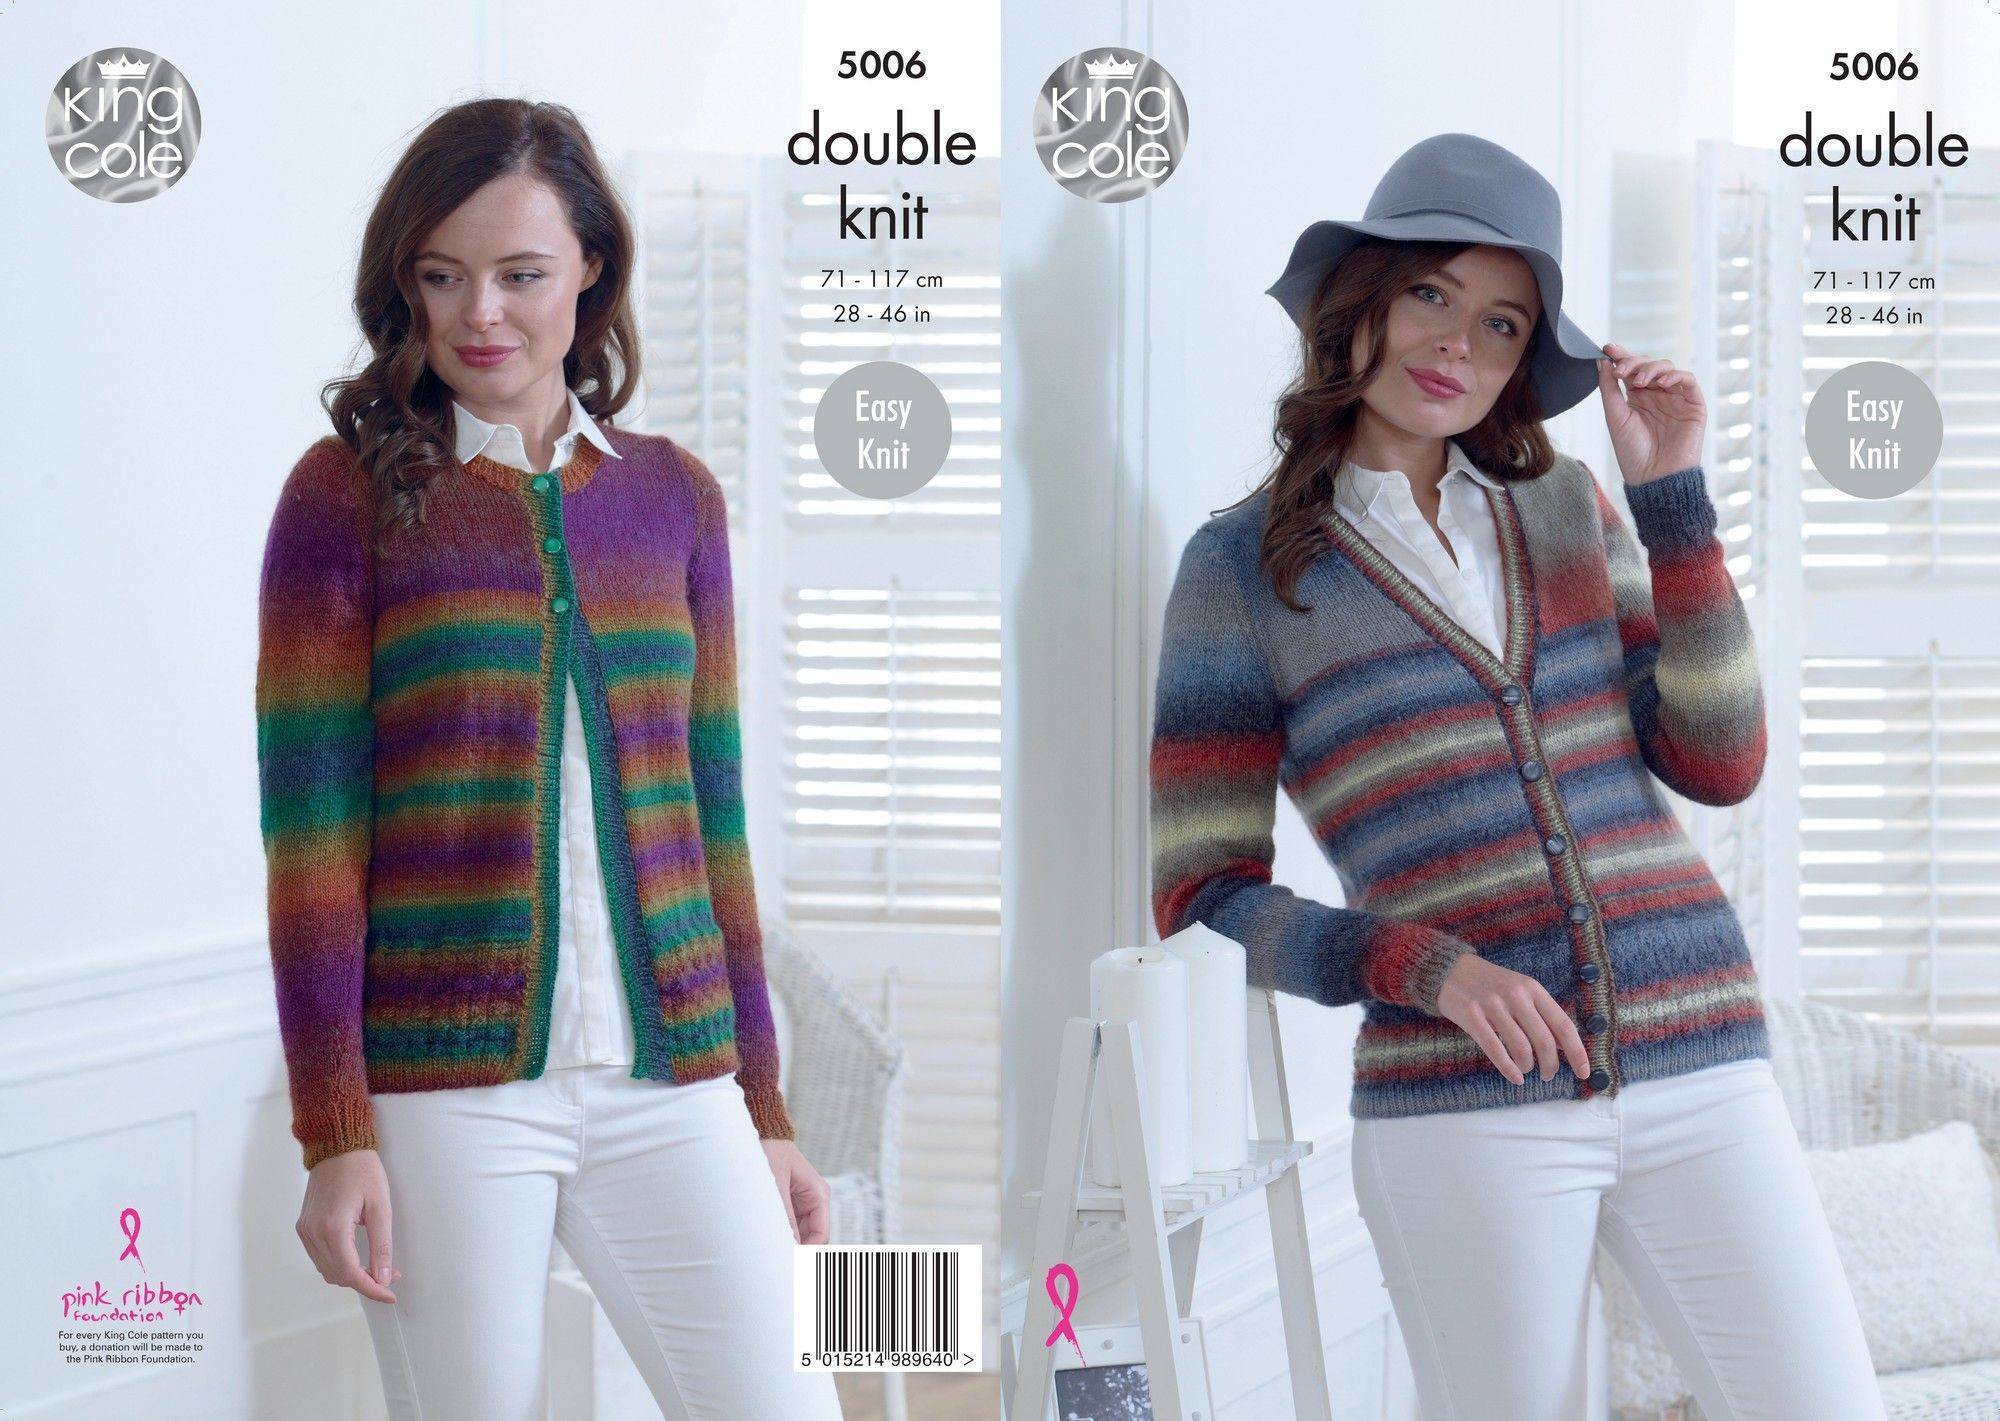 Cardigans in King Cole Riot DK (5006) | The Knitting Network